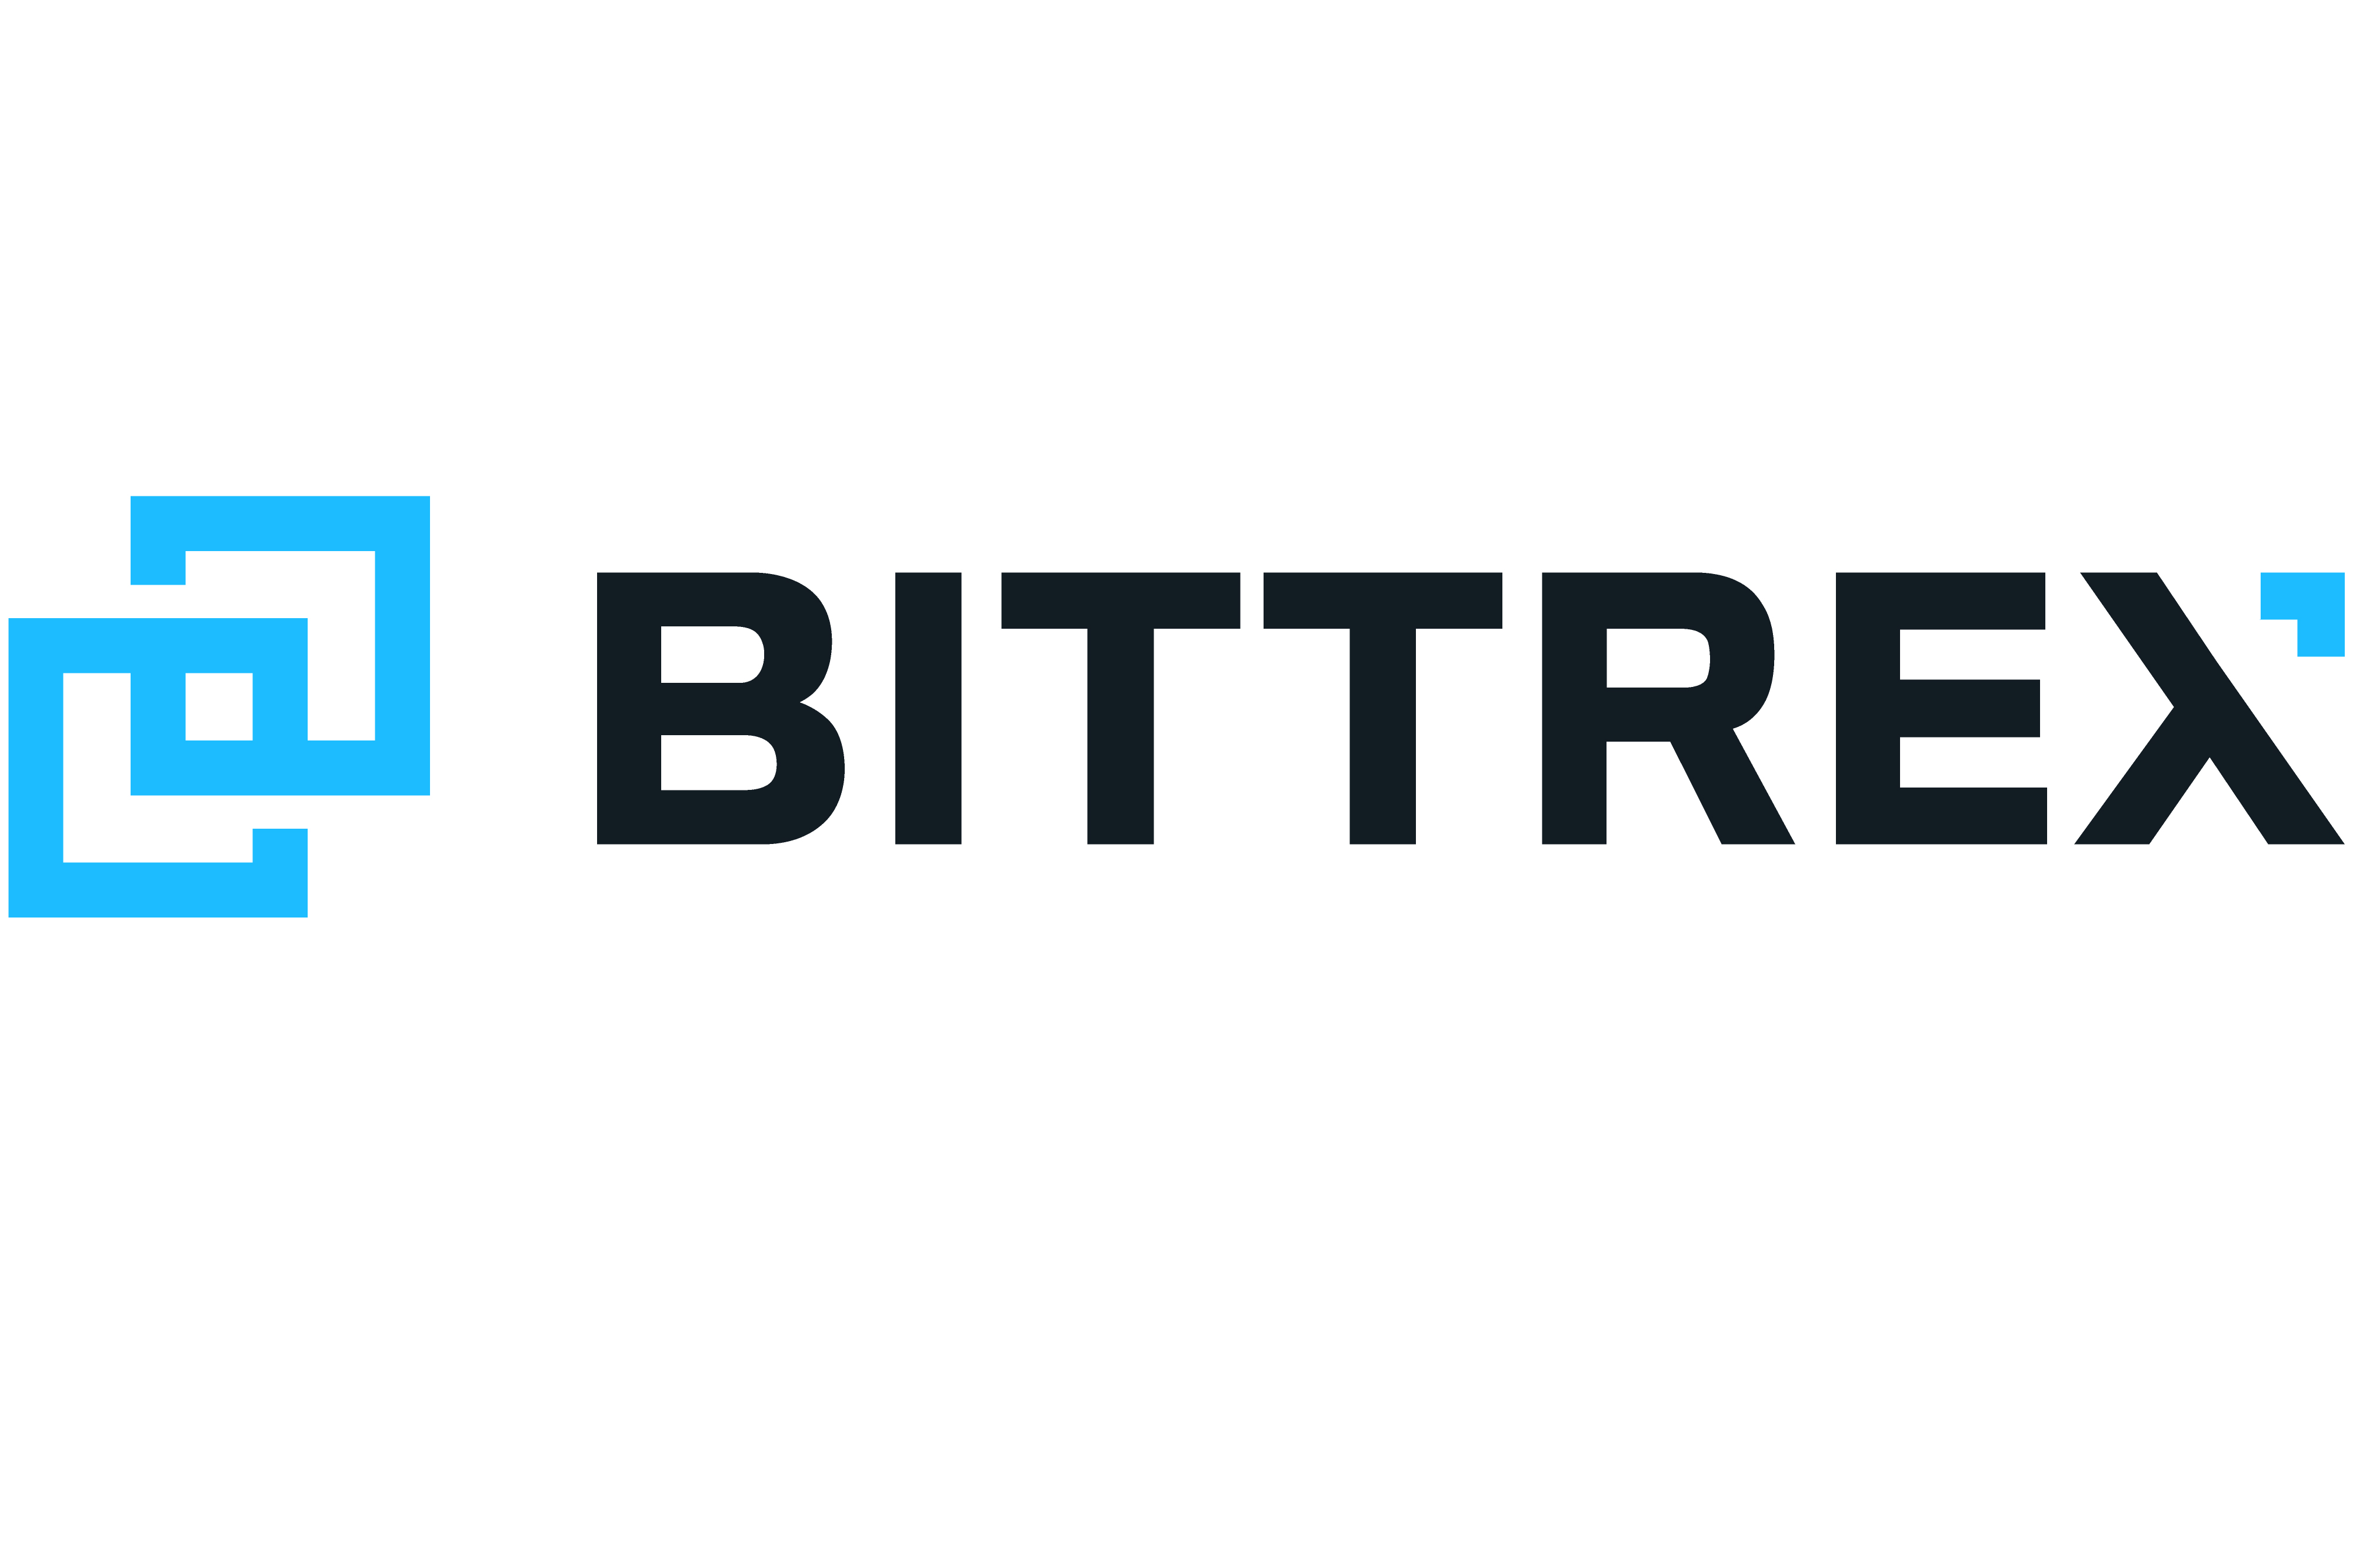 Bittrex Faced Enforcement Action from Florida before Bankruptcy Declaration